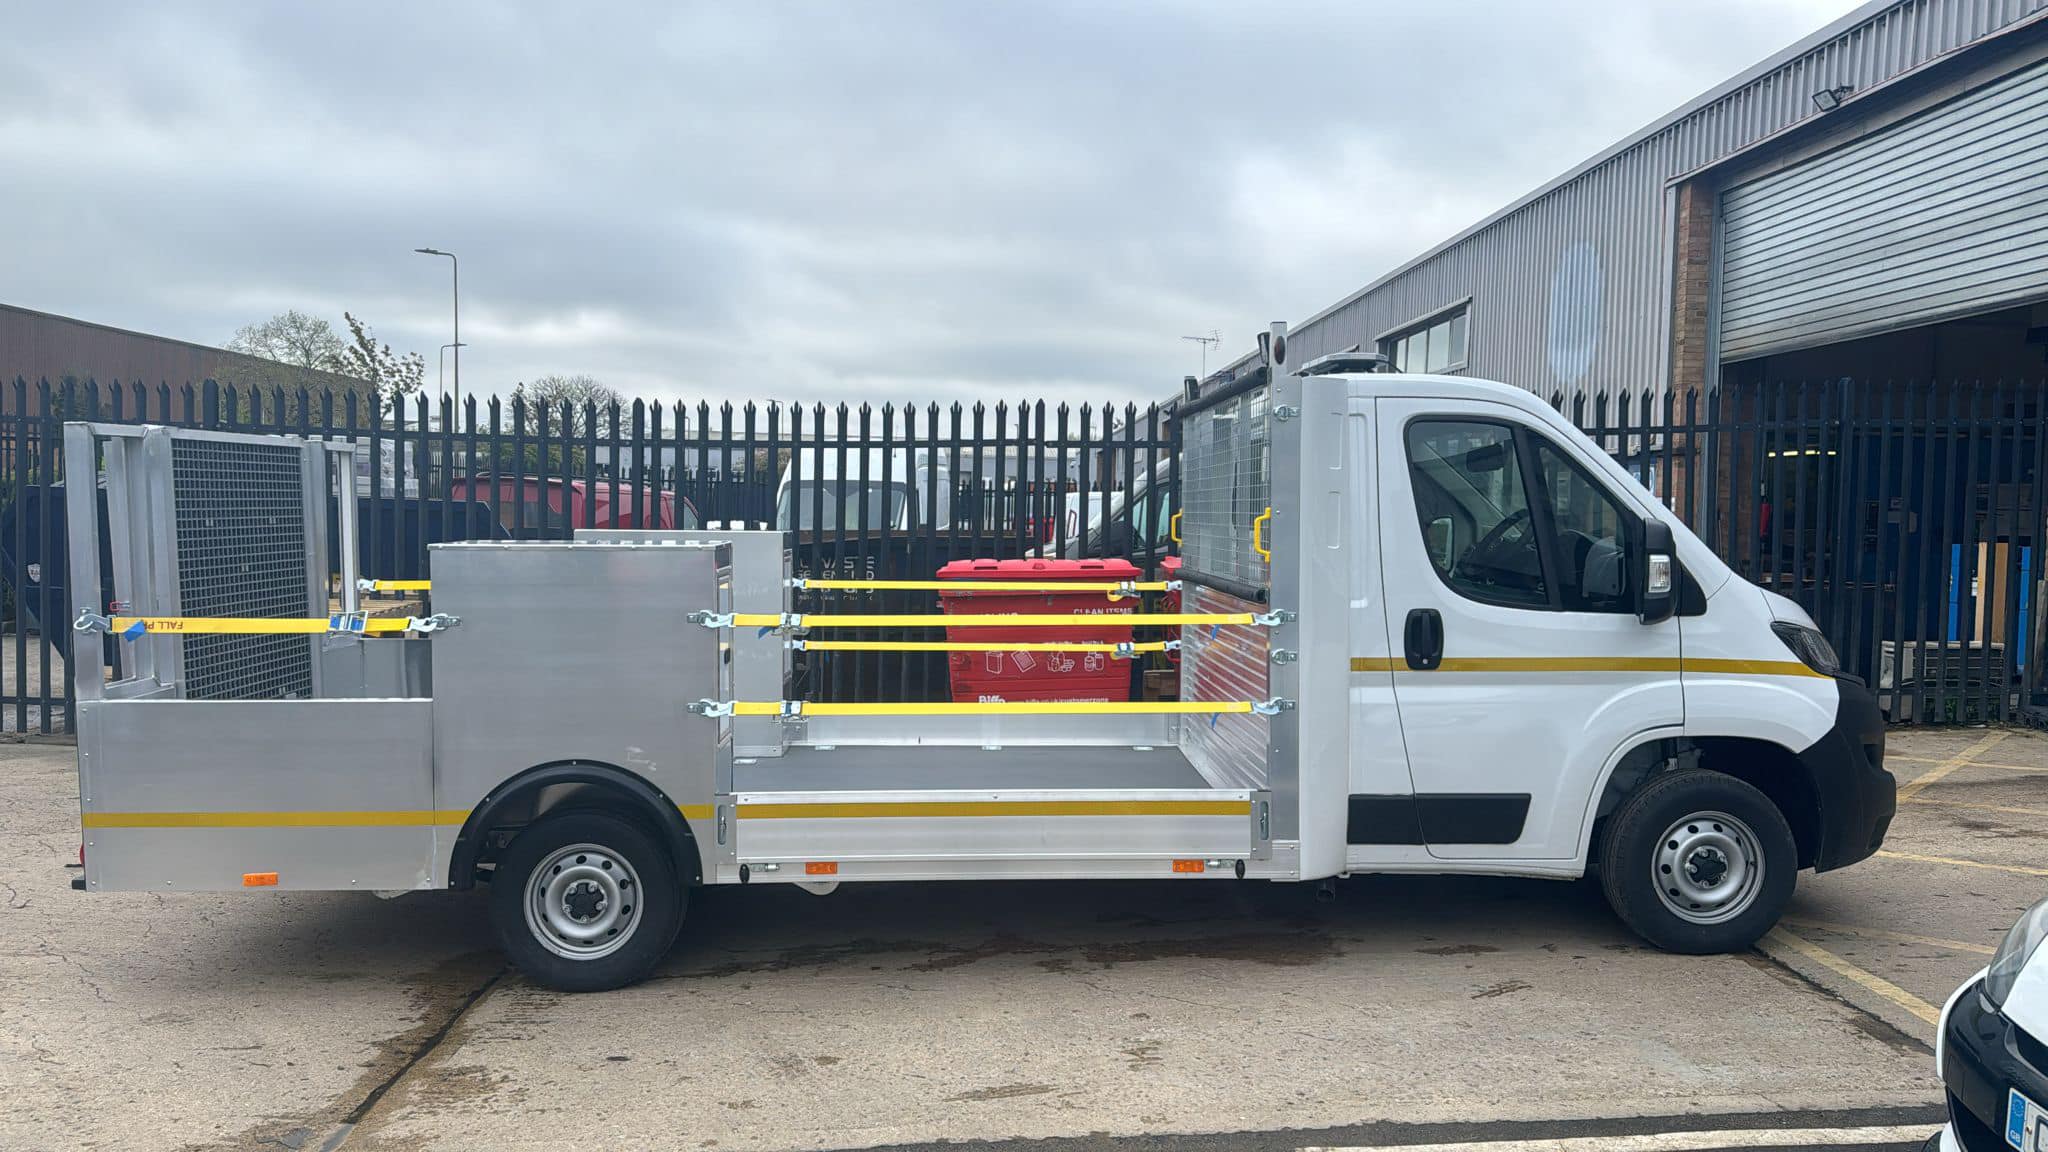 Today we take delivery of another brand new traffic management vehicle